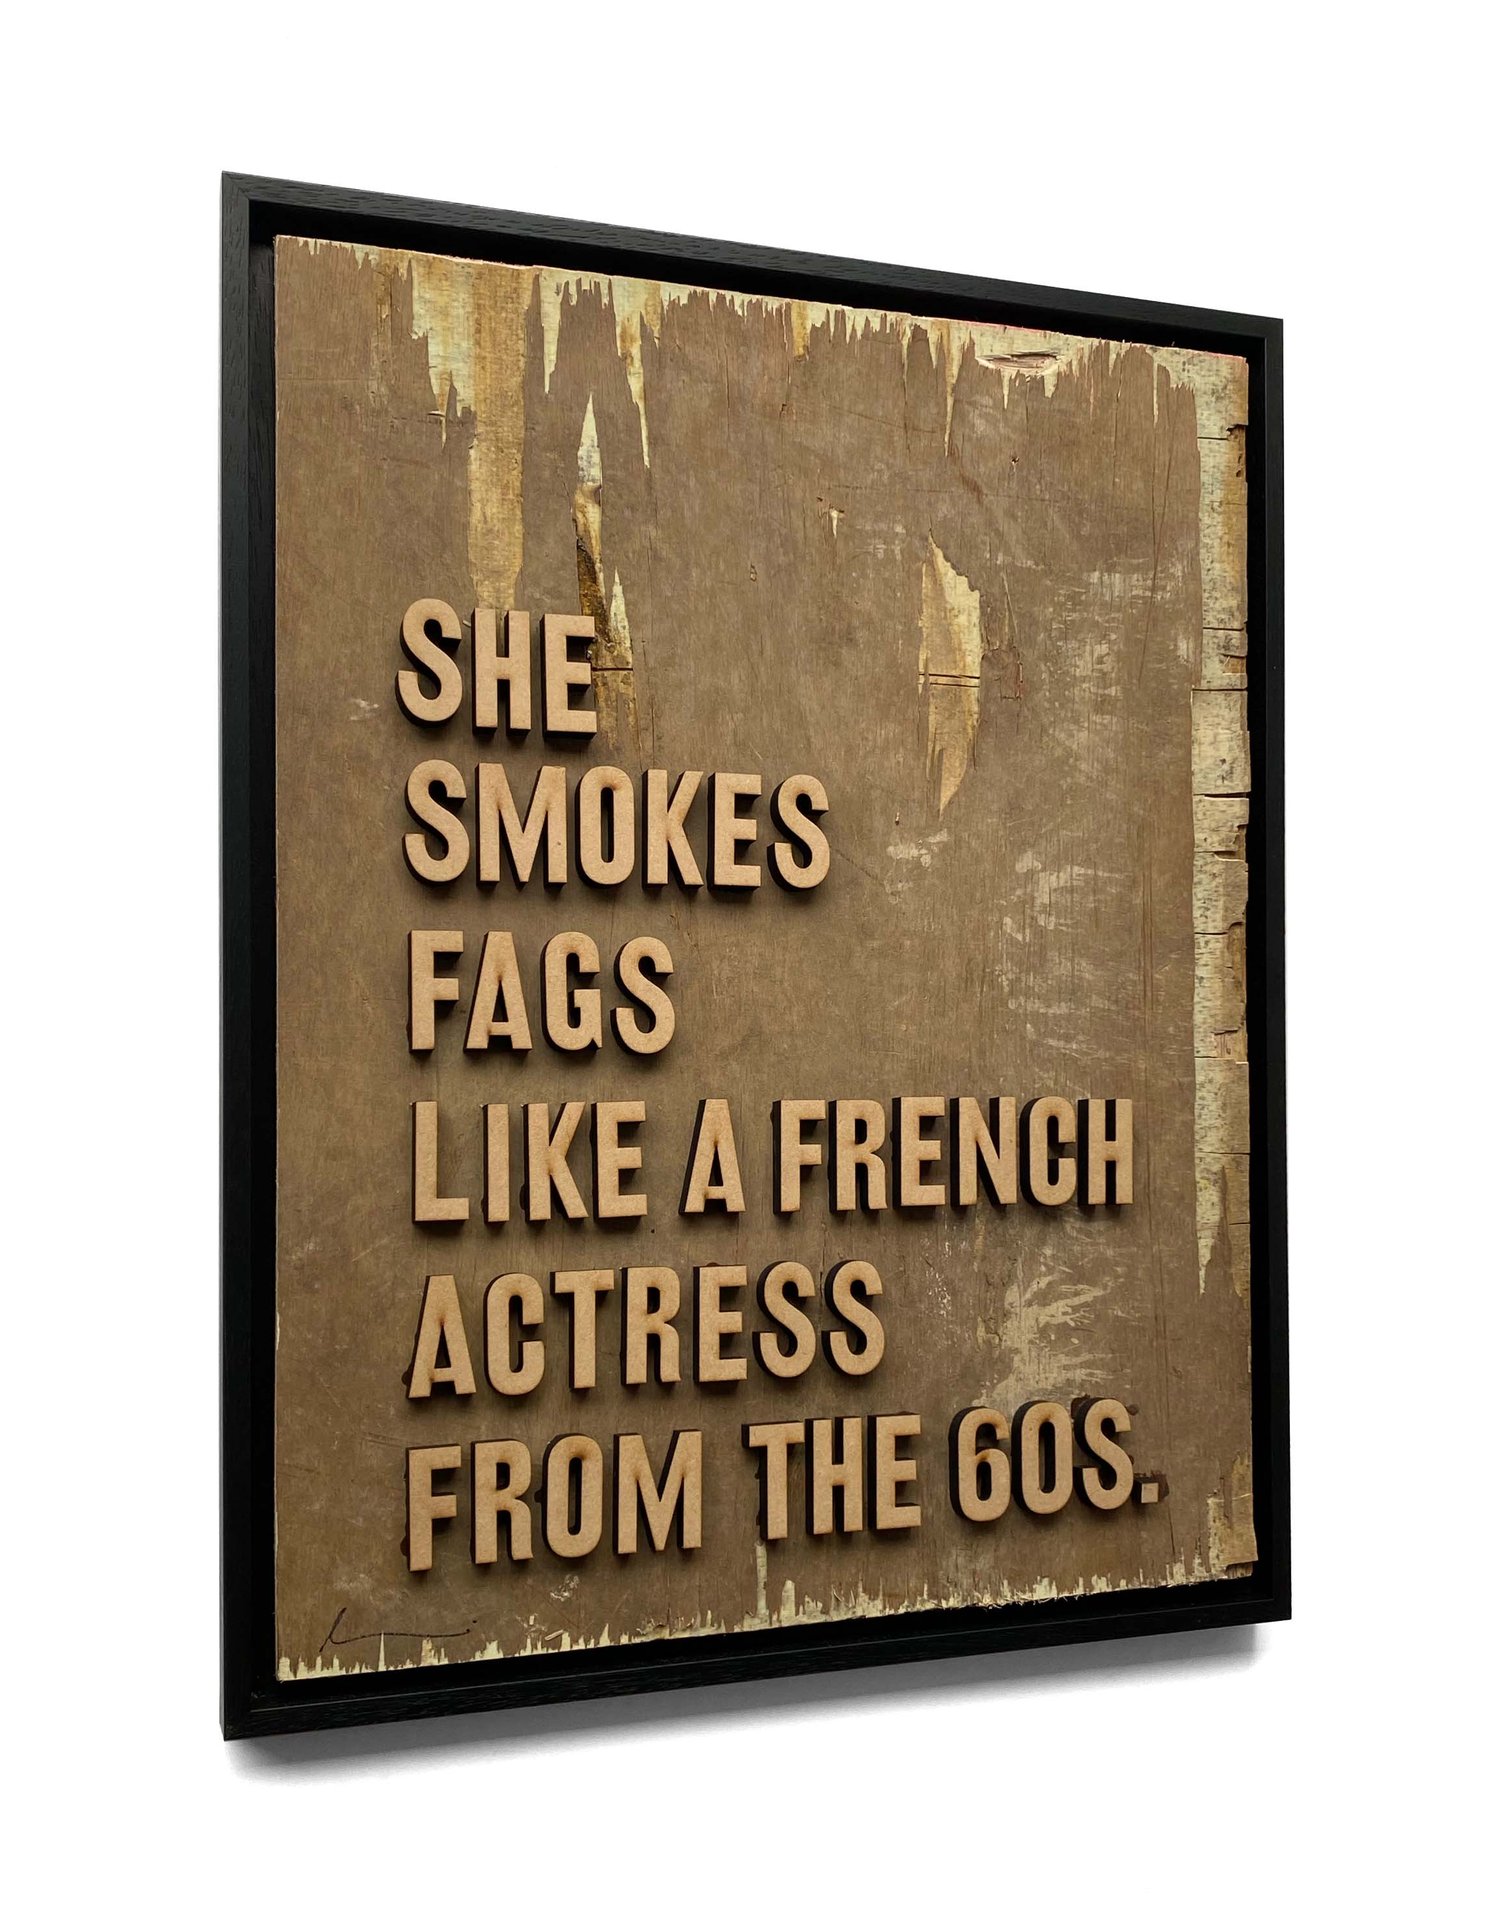 Image of 'She smokes fags like a french actress from the 60's.'  by Hackney Dave